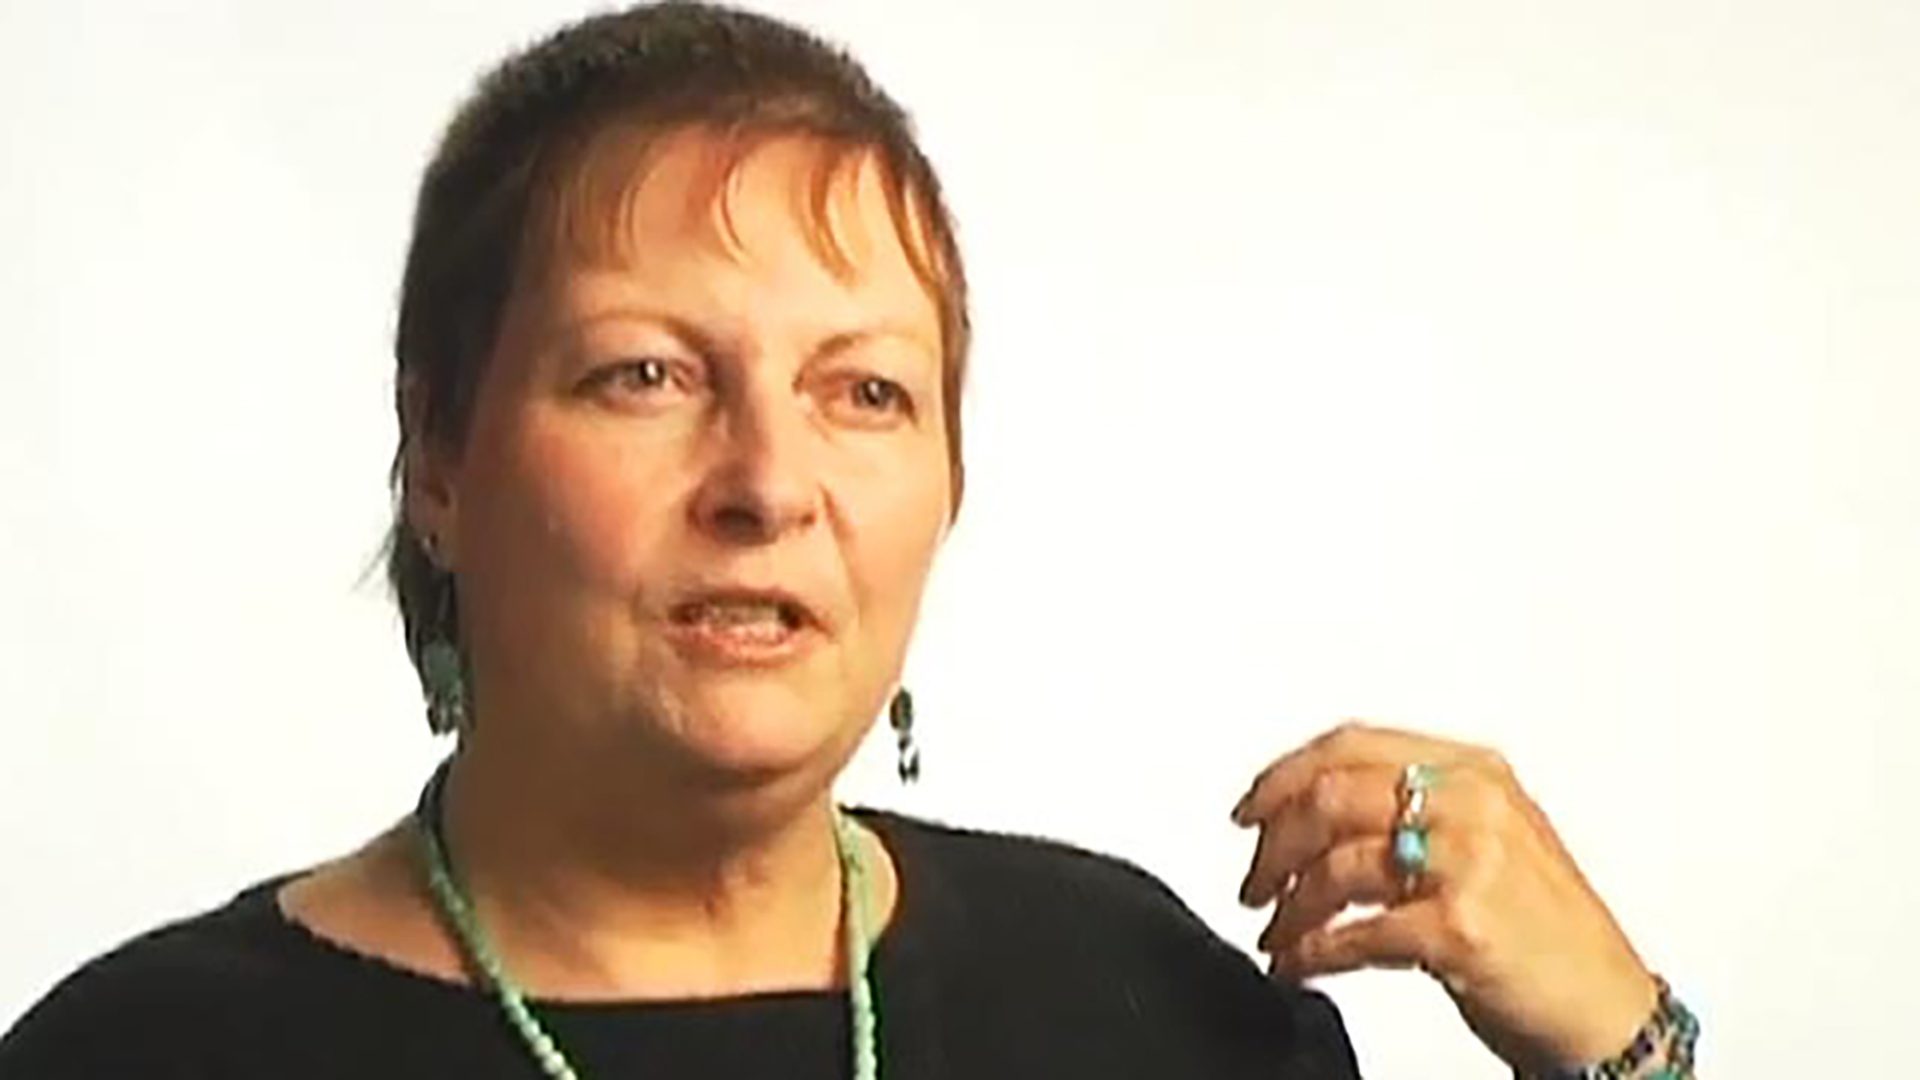 A middle aged woman wearing a black shirt being interviewed